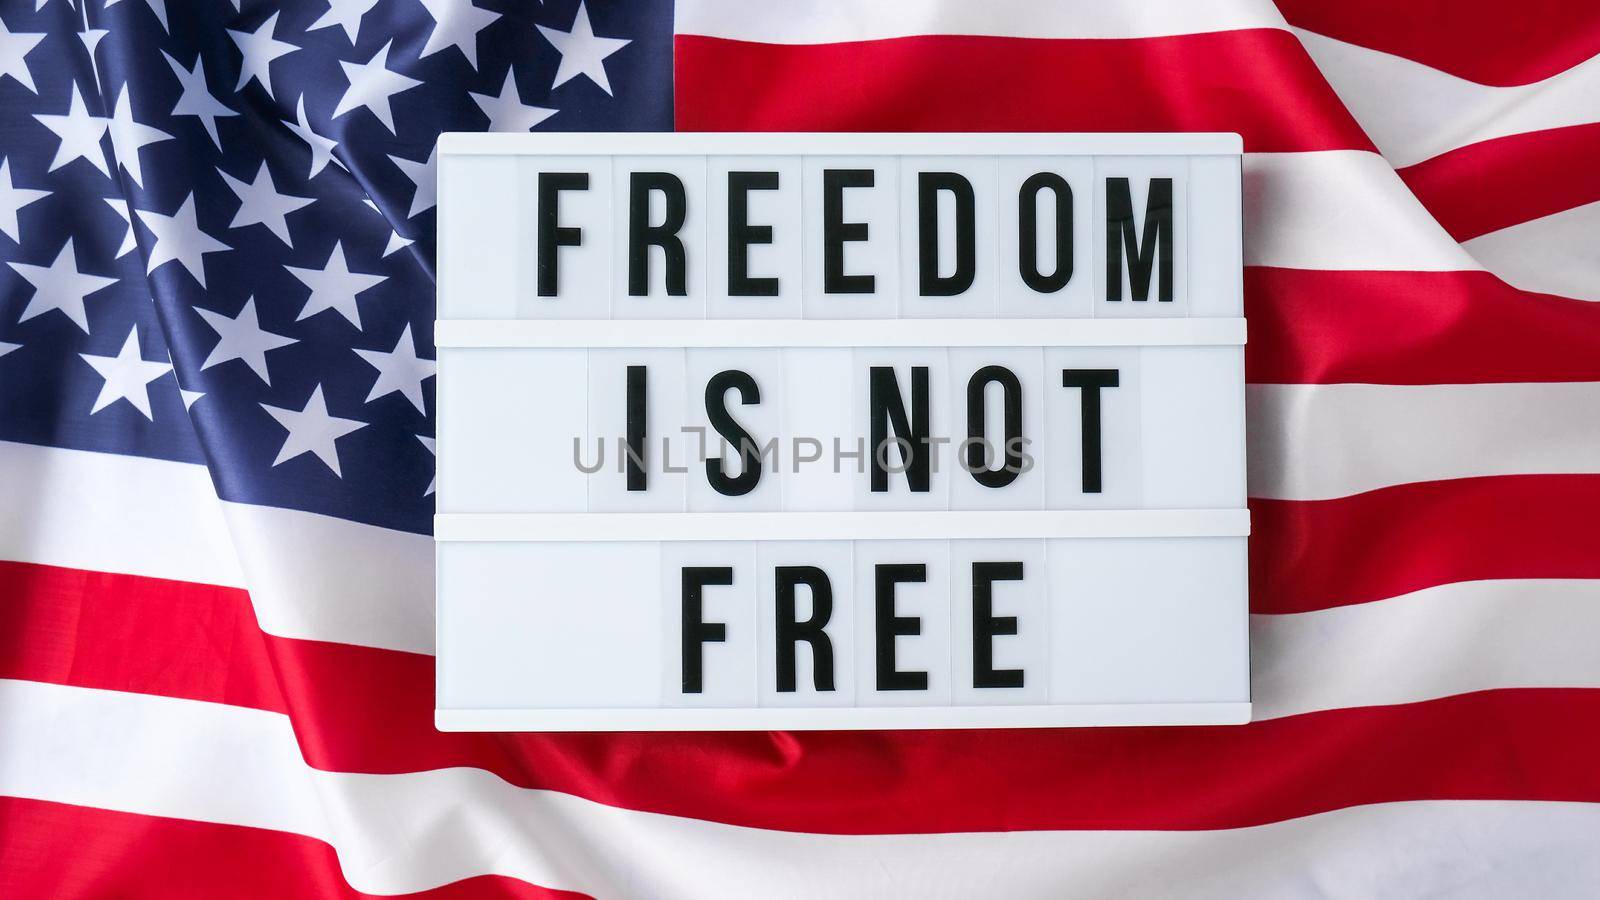 American flag. Lightbox with text FREEDOM IS NOT FREE Flag of the united states of America. July 4th Independence Day. USA patriotism national holiday. Usa proud. Freedom concept